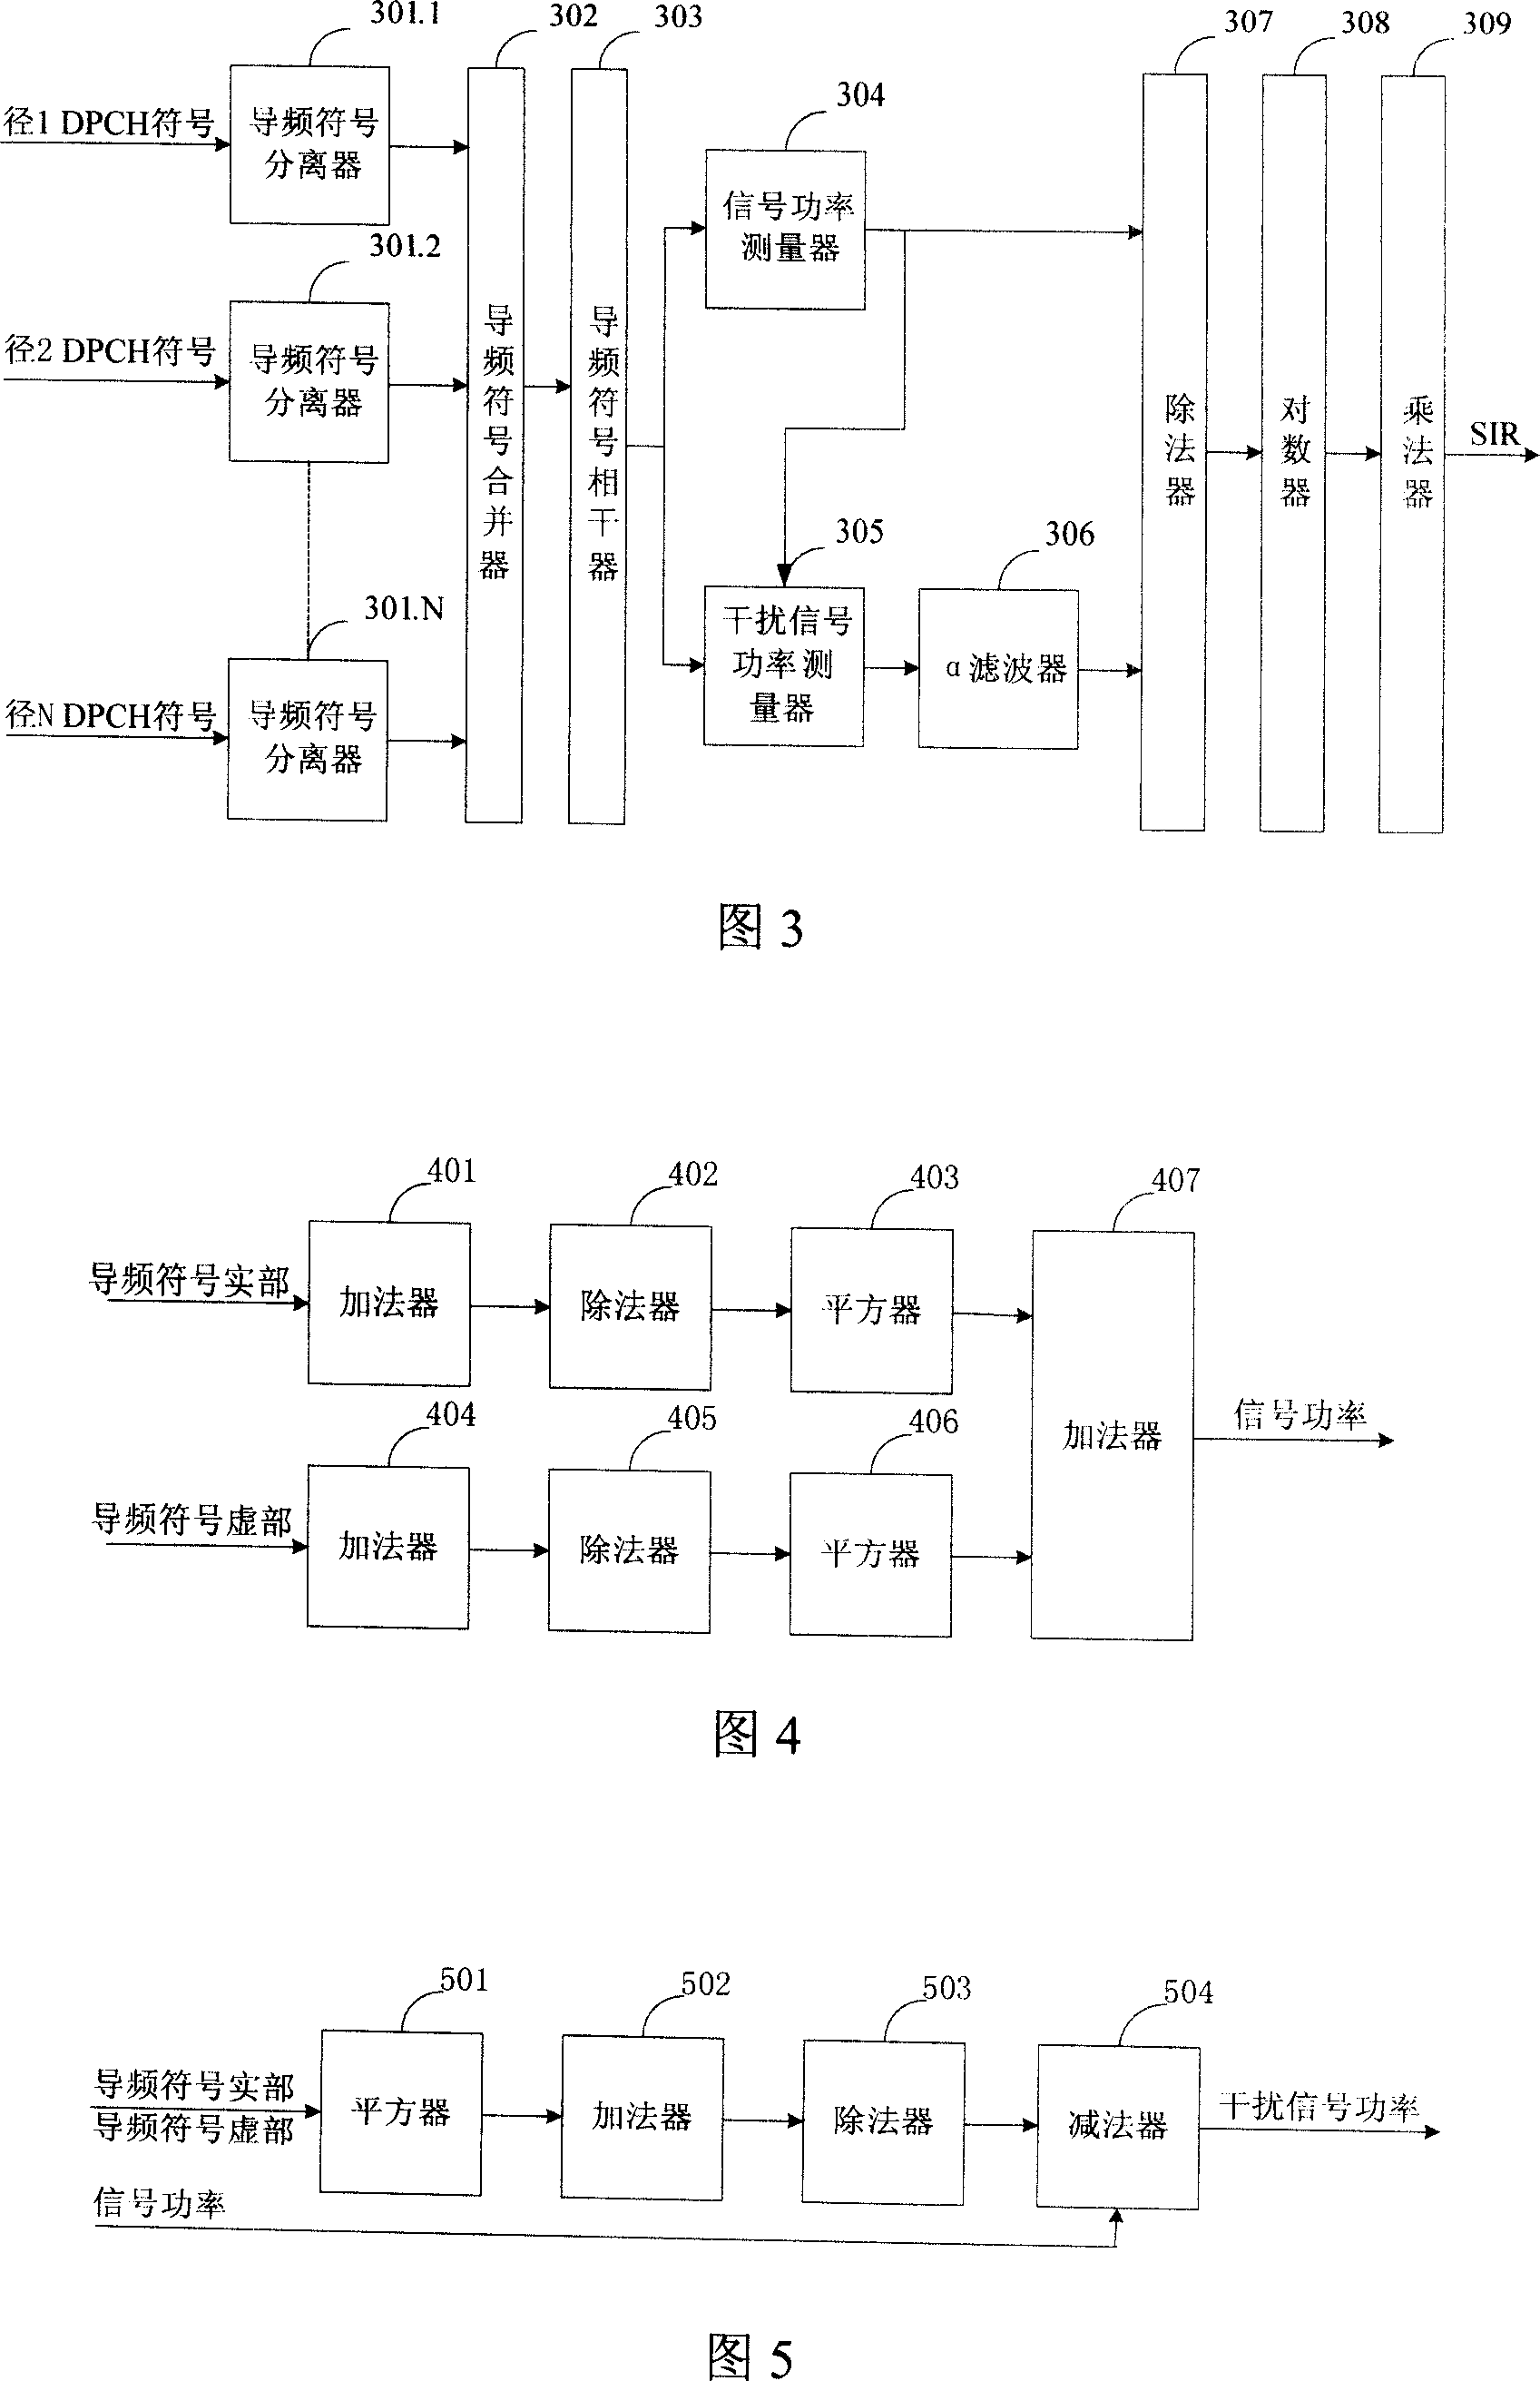 Method and device for measuring WCDMA system downlink power controlled signal-interference ratio